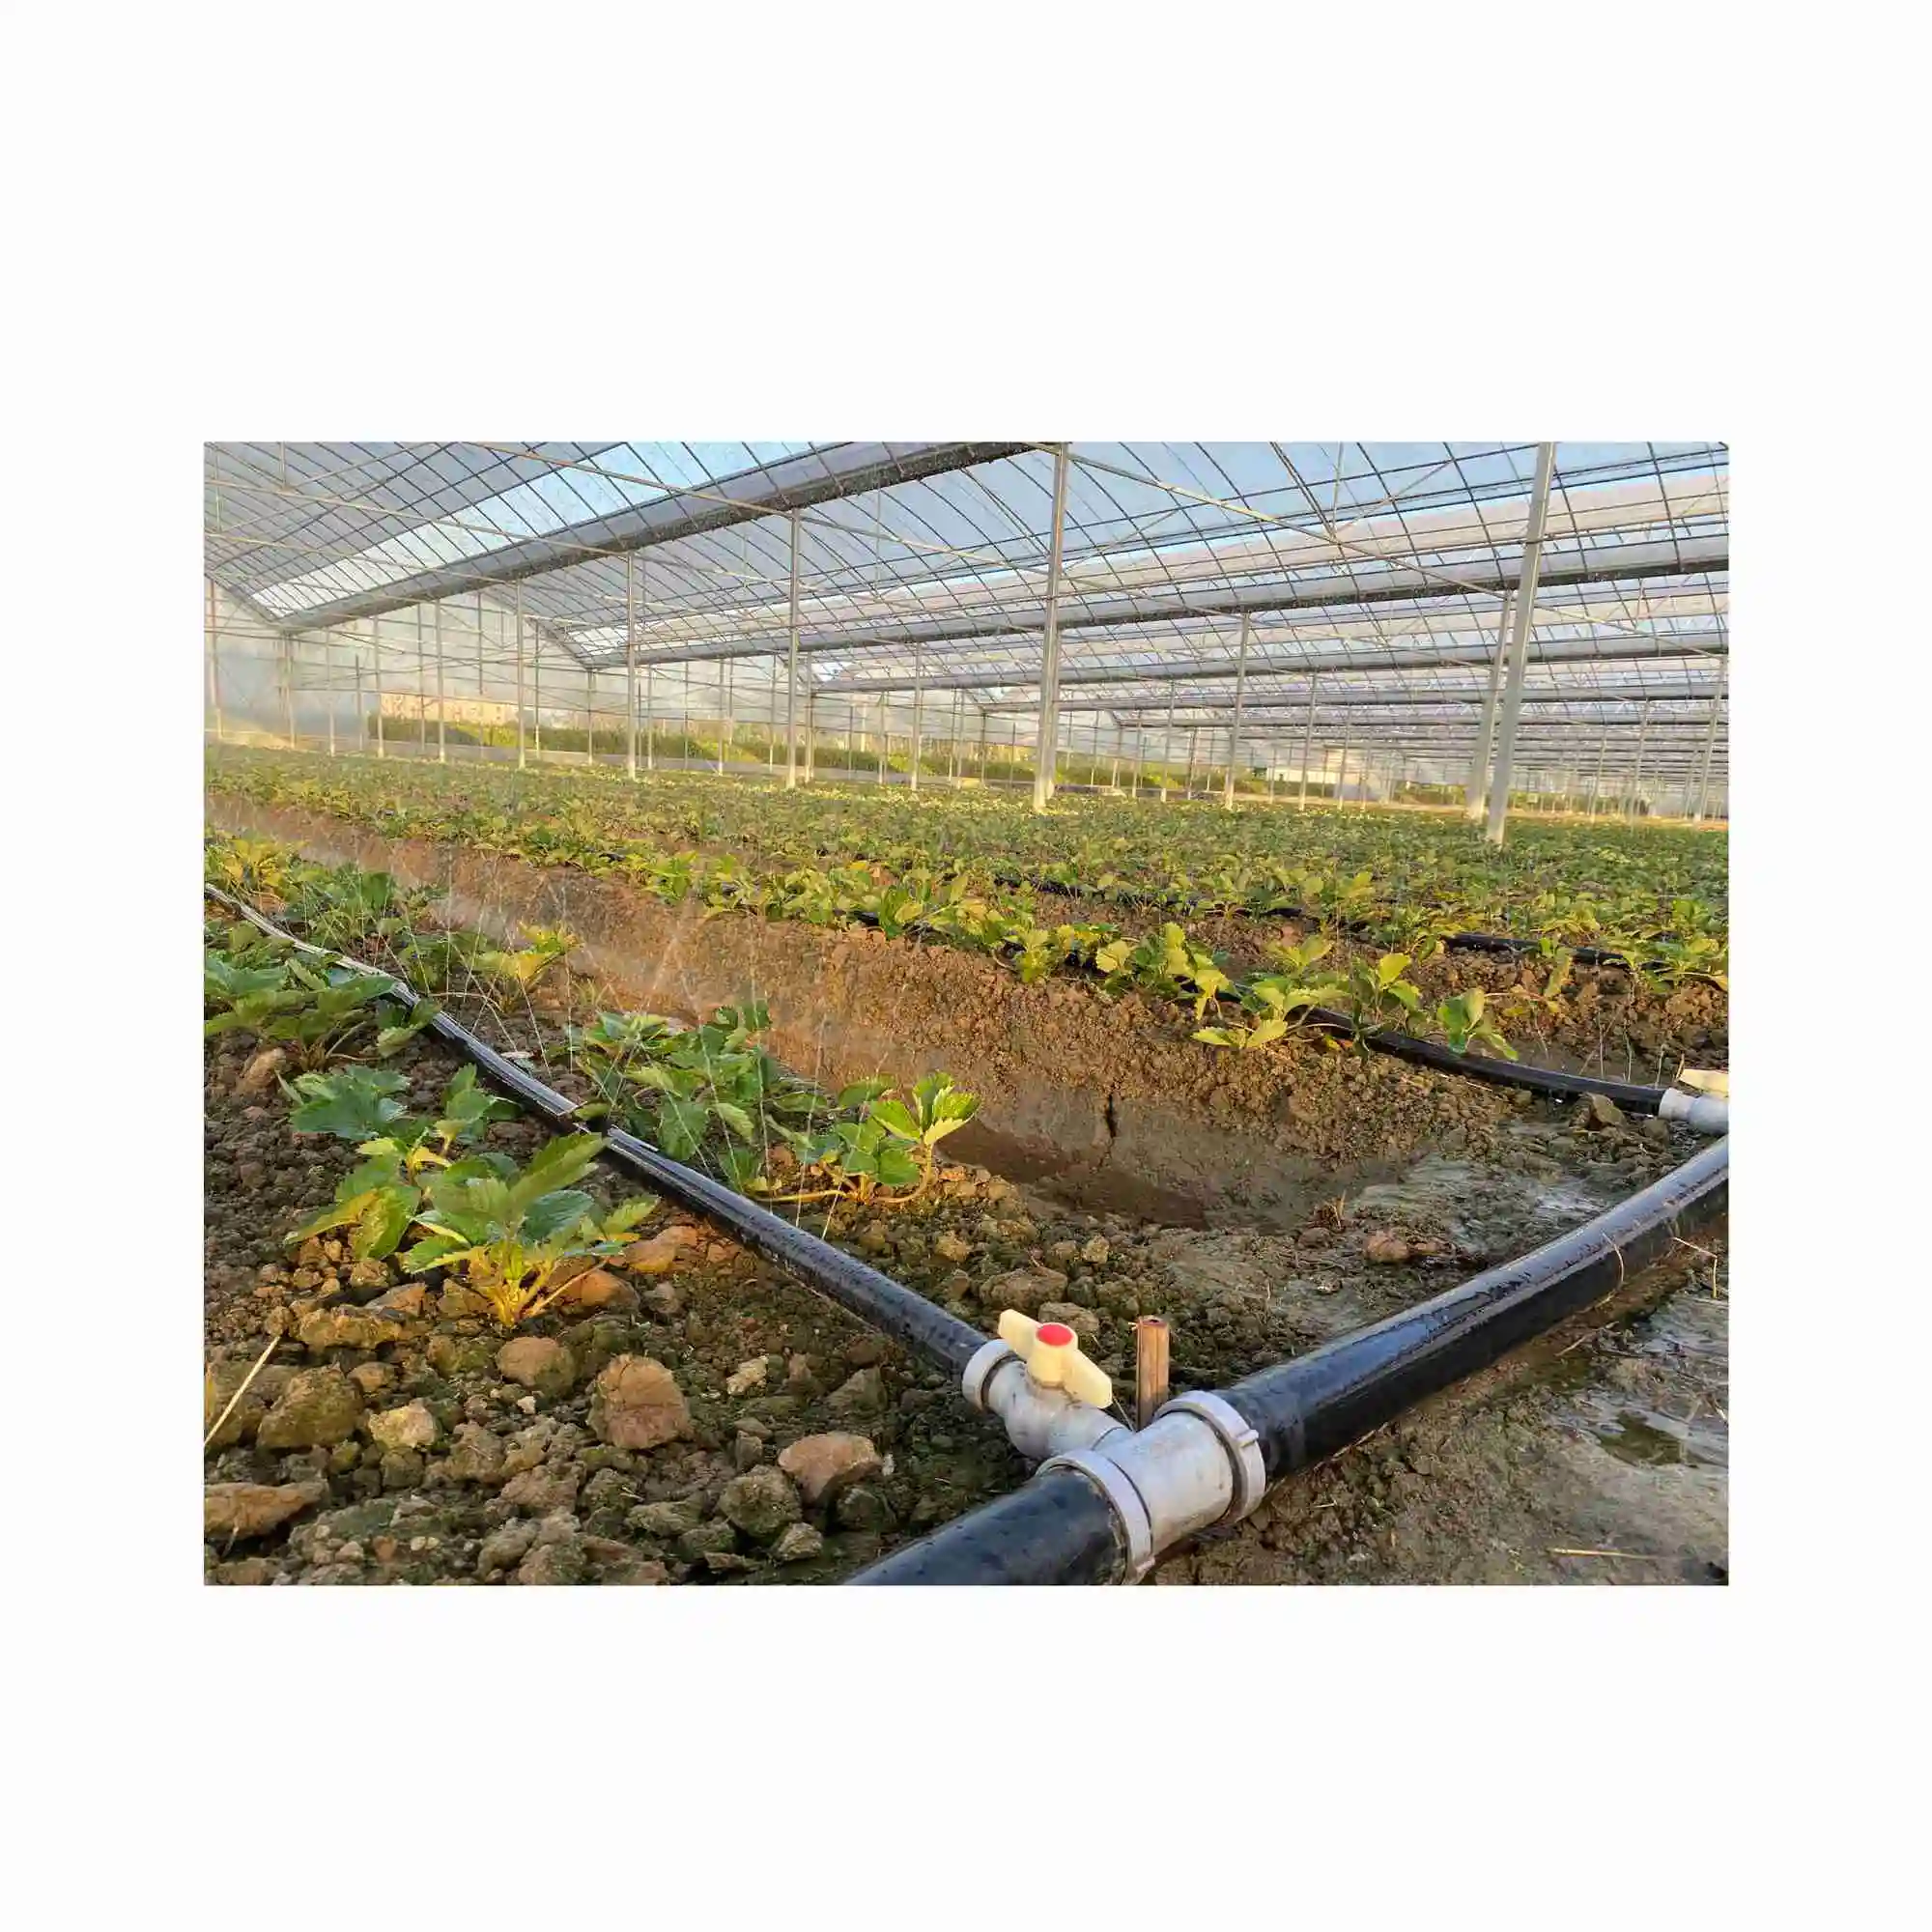 Neetrue soaker hose lawn irrigation plant irrigation system micro spray hose for Agriculture